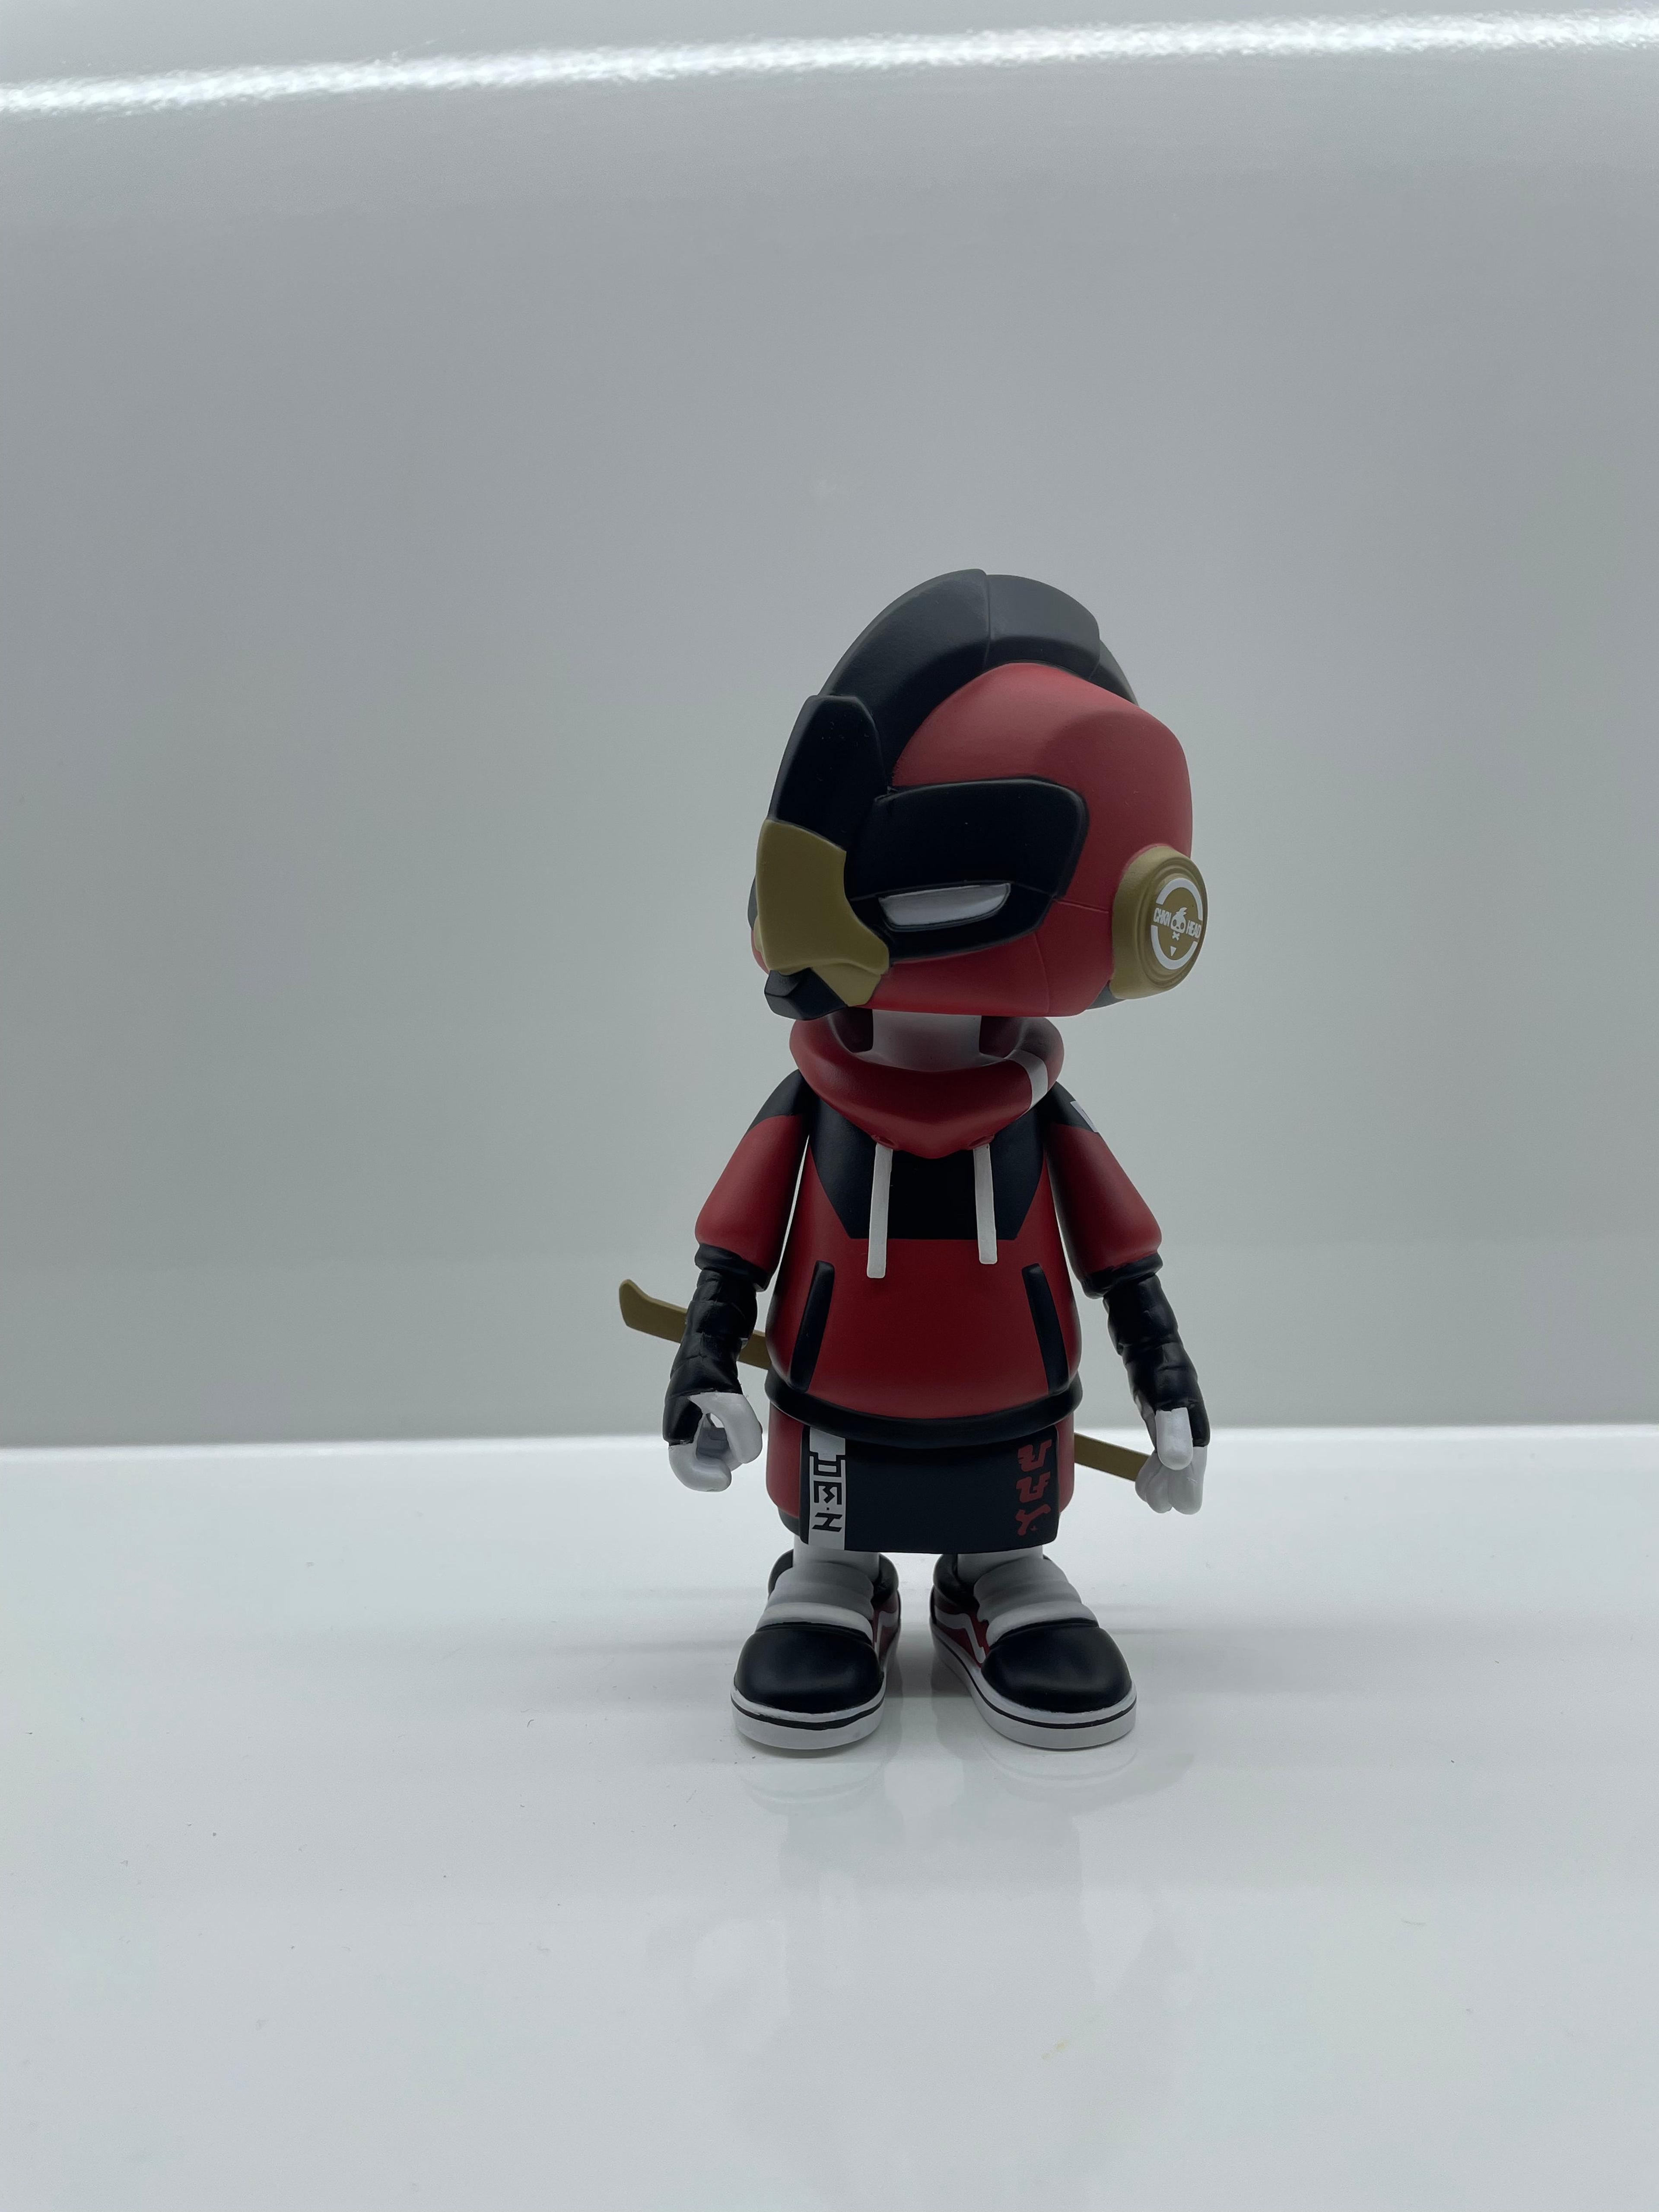 Alternate View 7 of C4: Red Talon by ChknHead Creon x Martian Toys